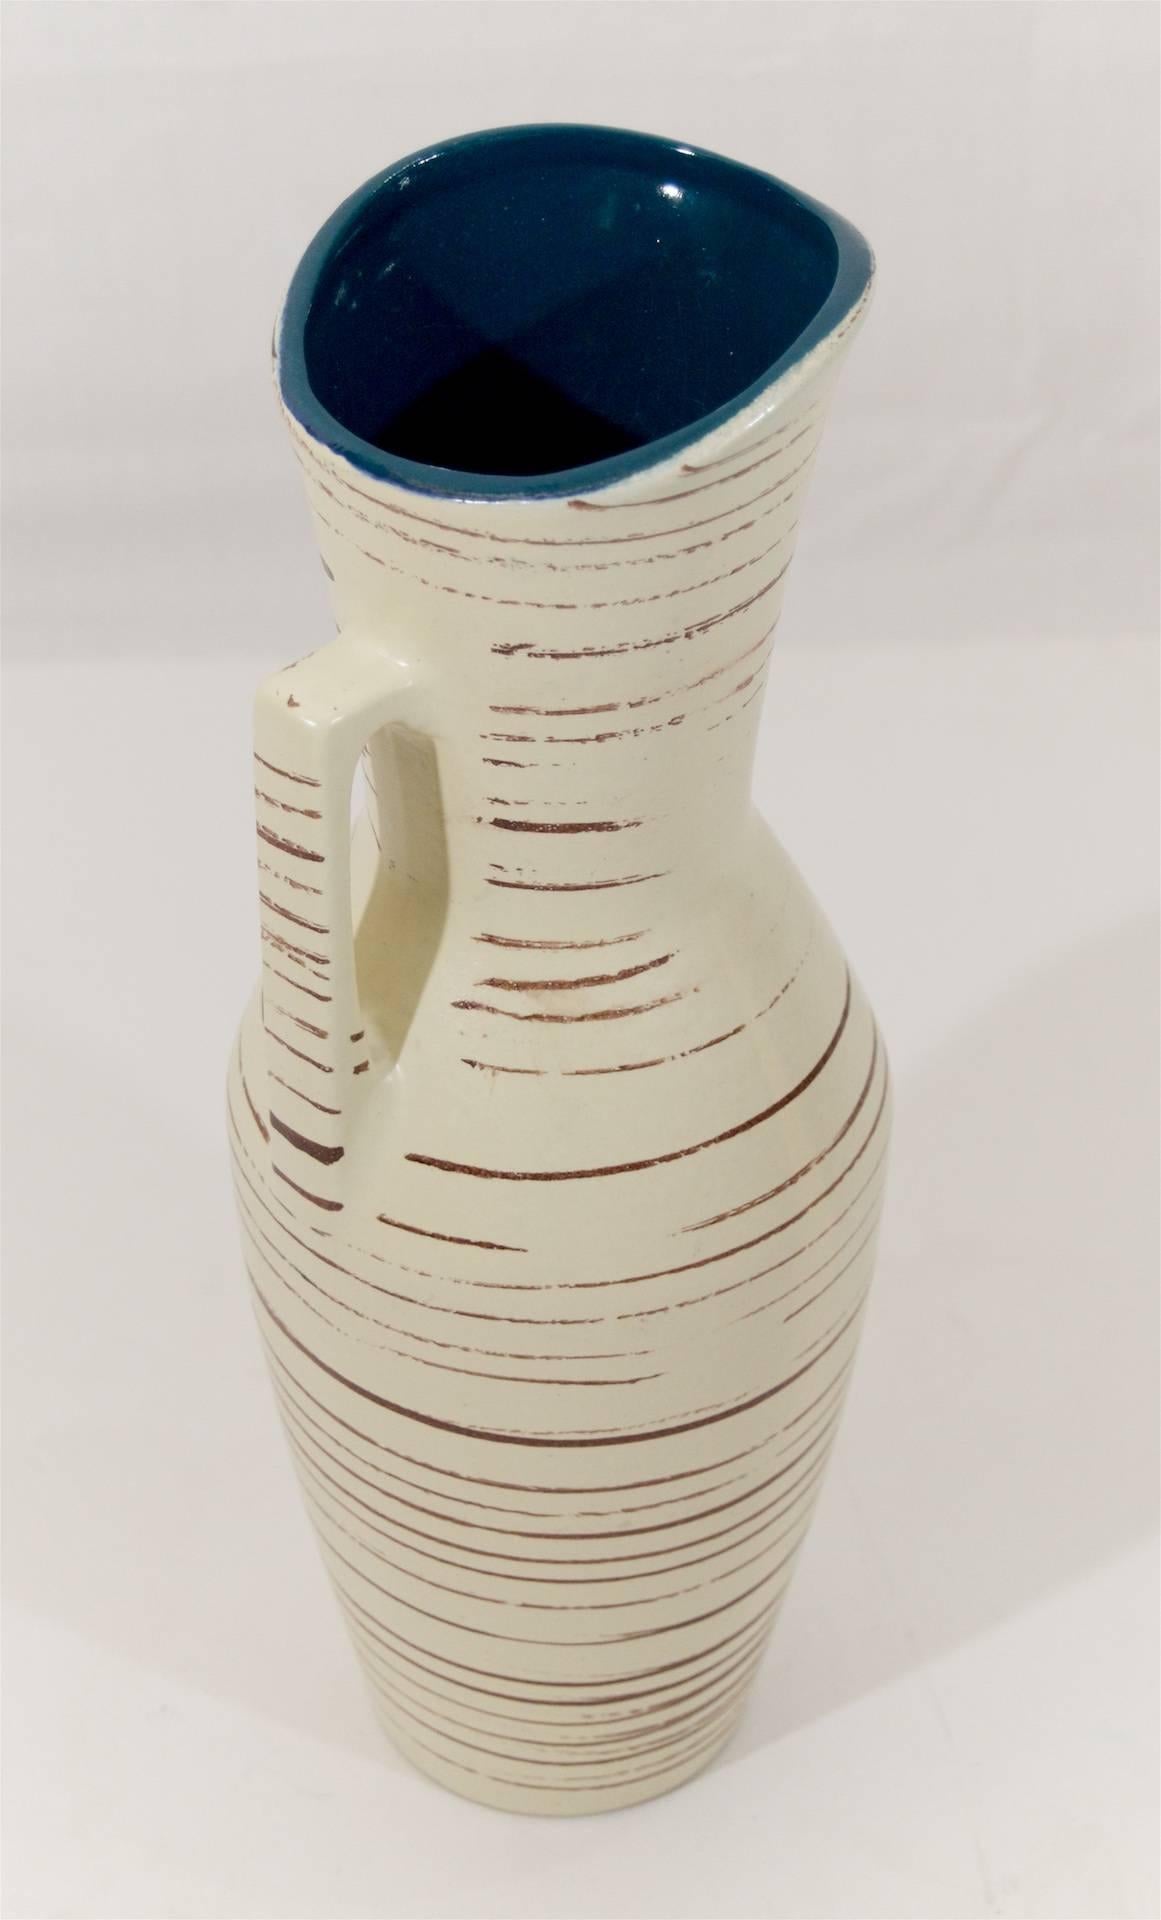 Elegantly proportioned ewer by Scheurich Keramic, the outer surface with an earthen-tone striated glaze, and a deep ultramarine blue glaze on the interior.